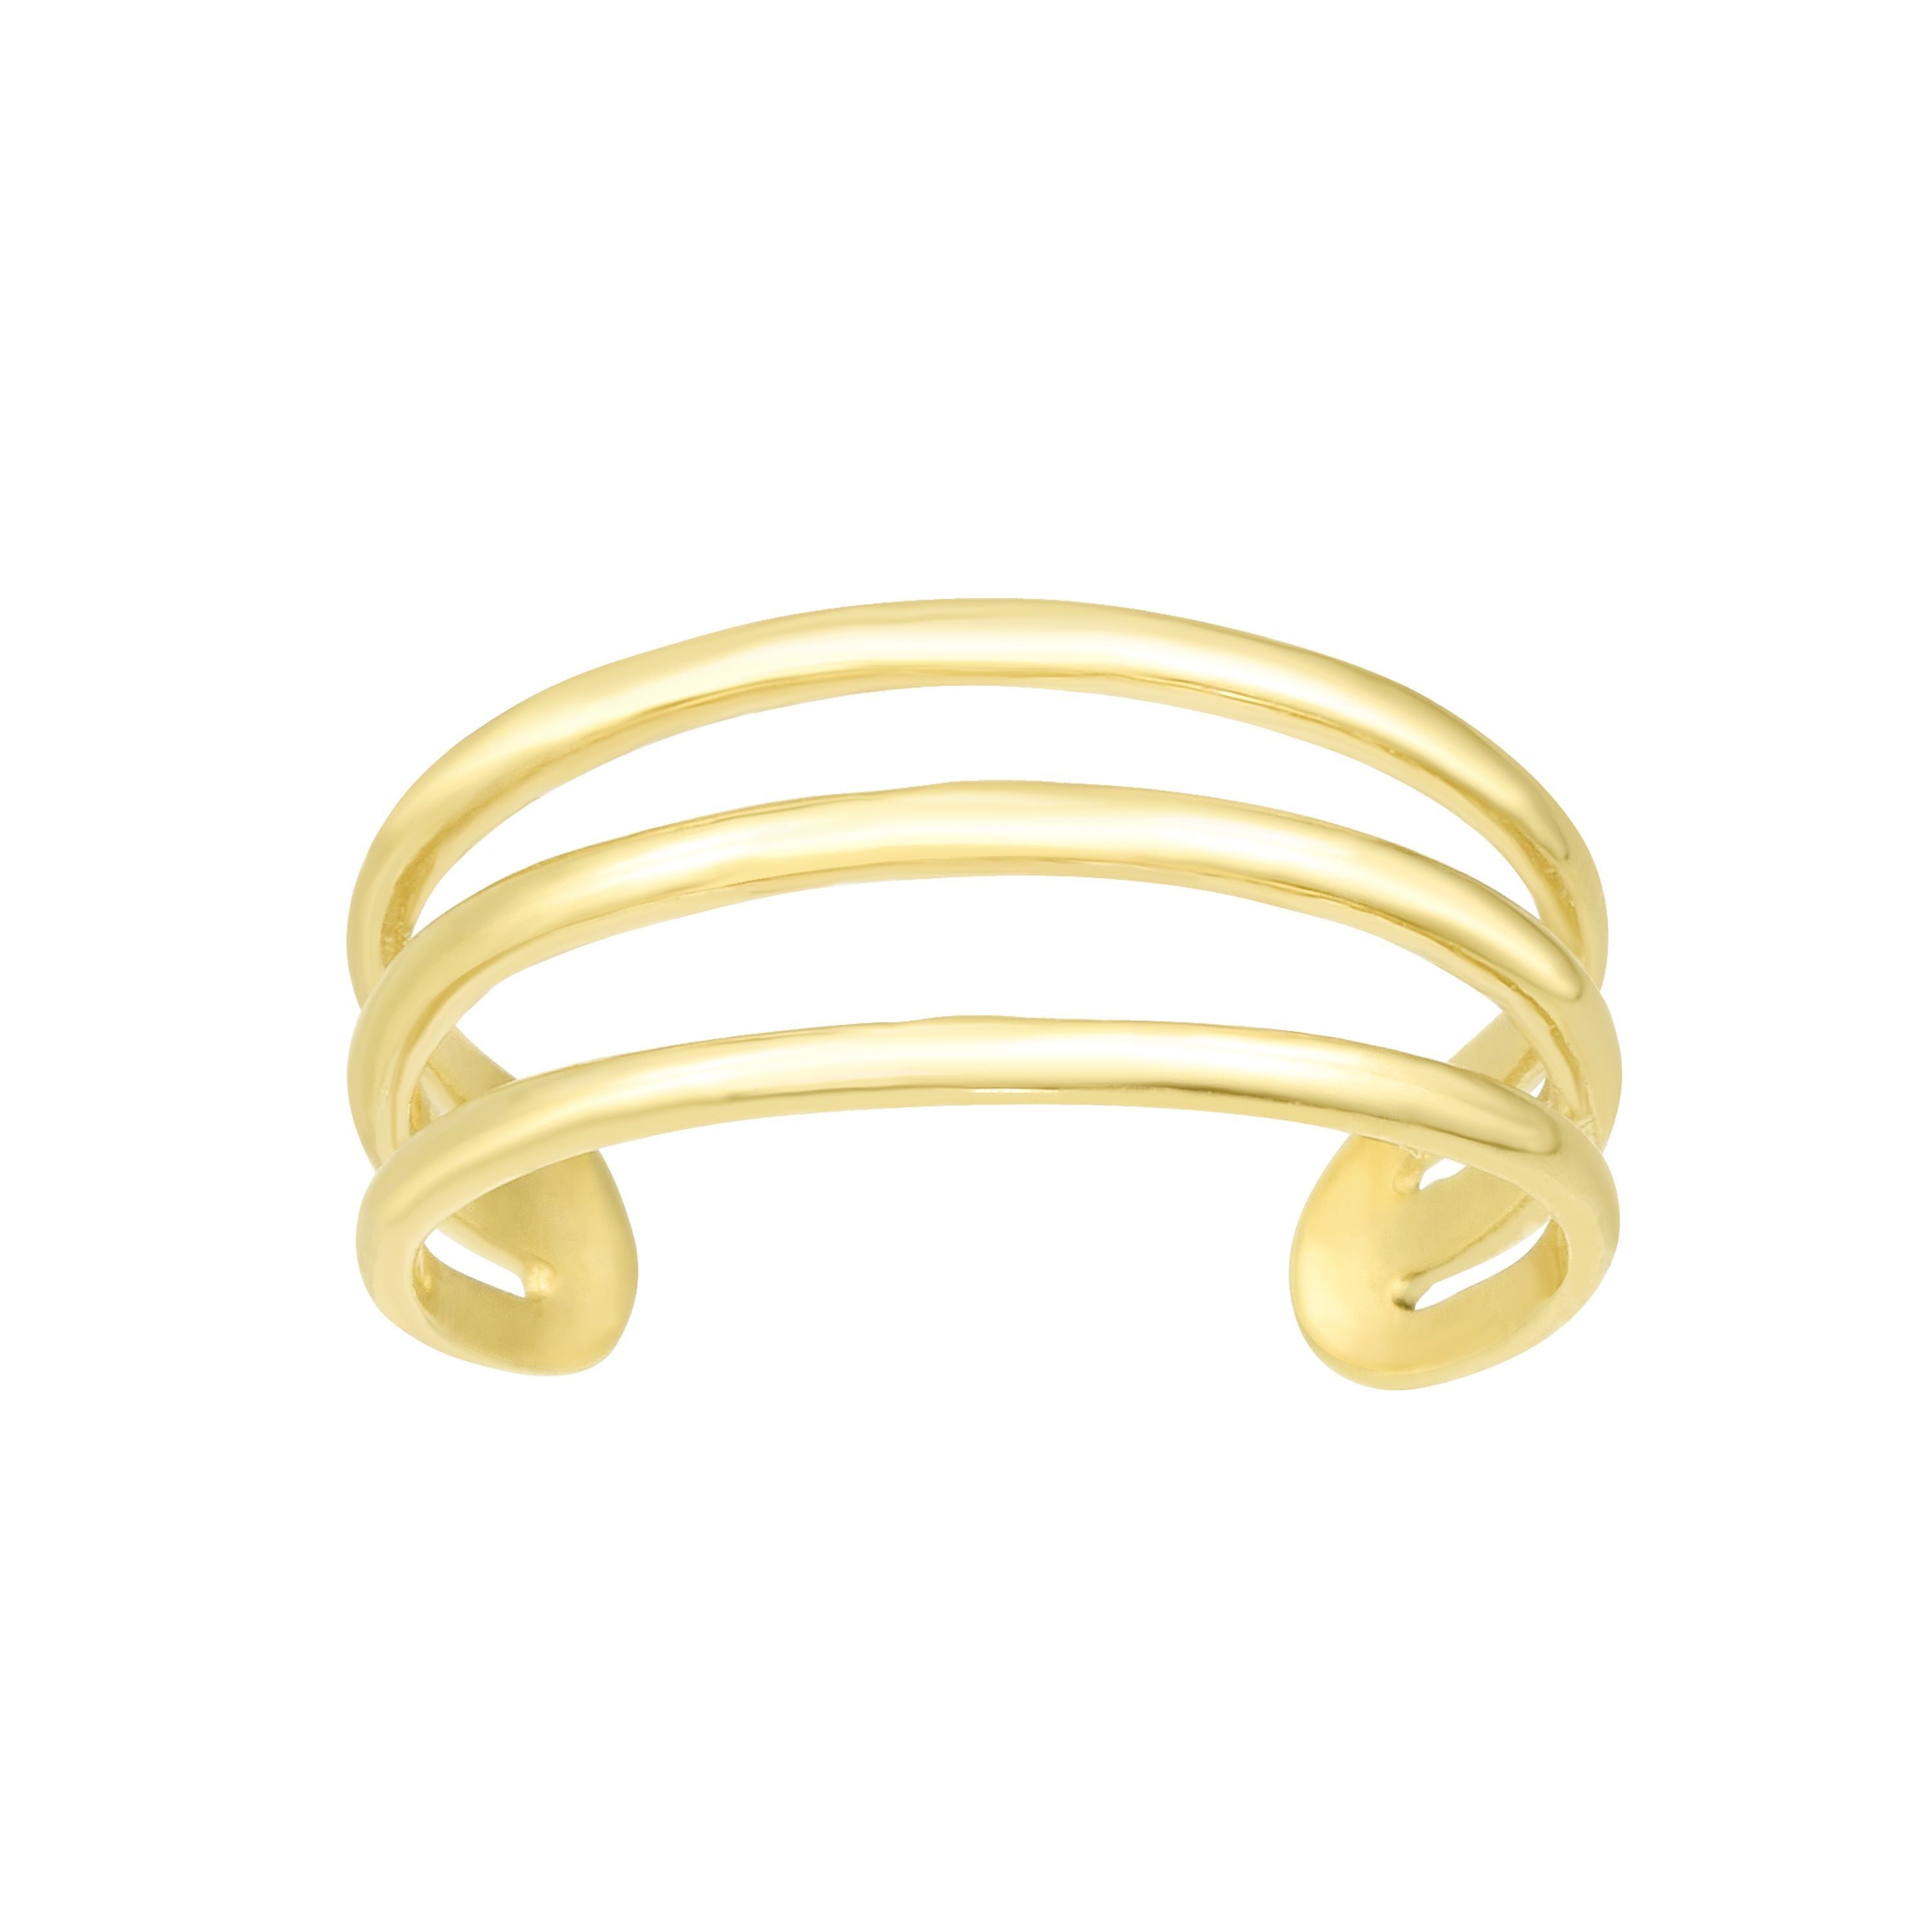 14K Yellow Gold Triple Bar Adjustable Toe Ring 6.5mm fine designer jewelry for men and women